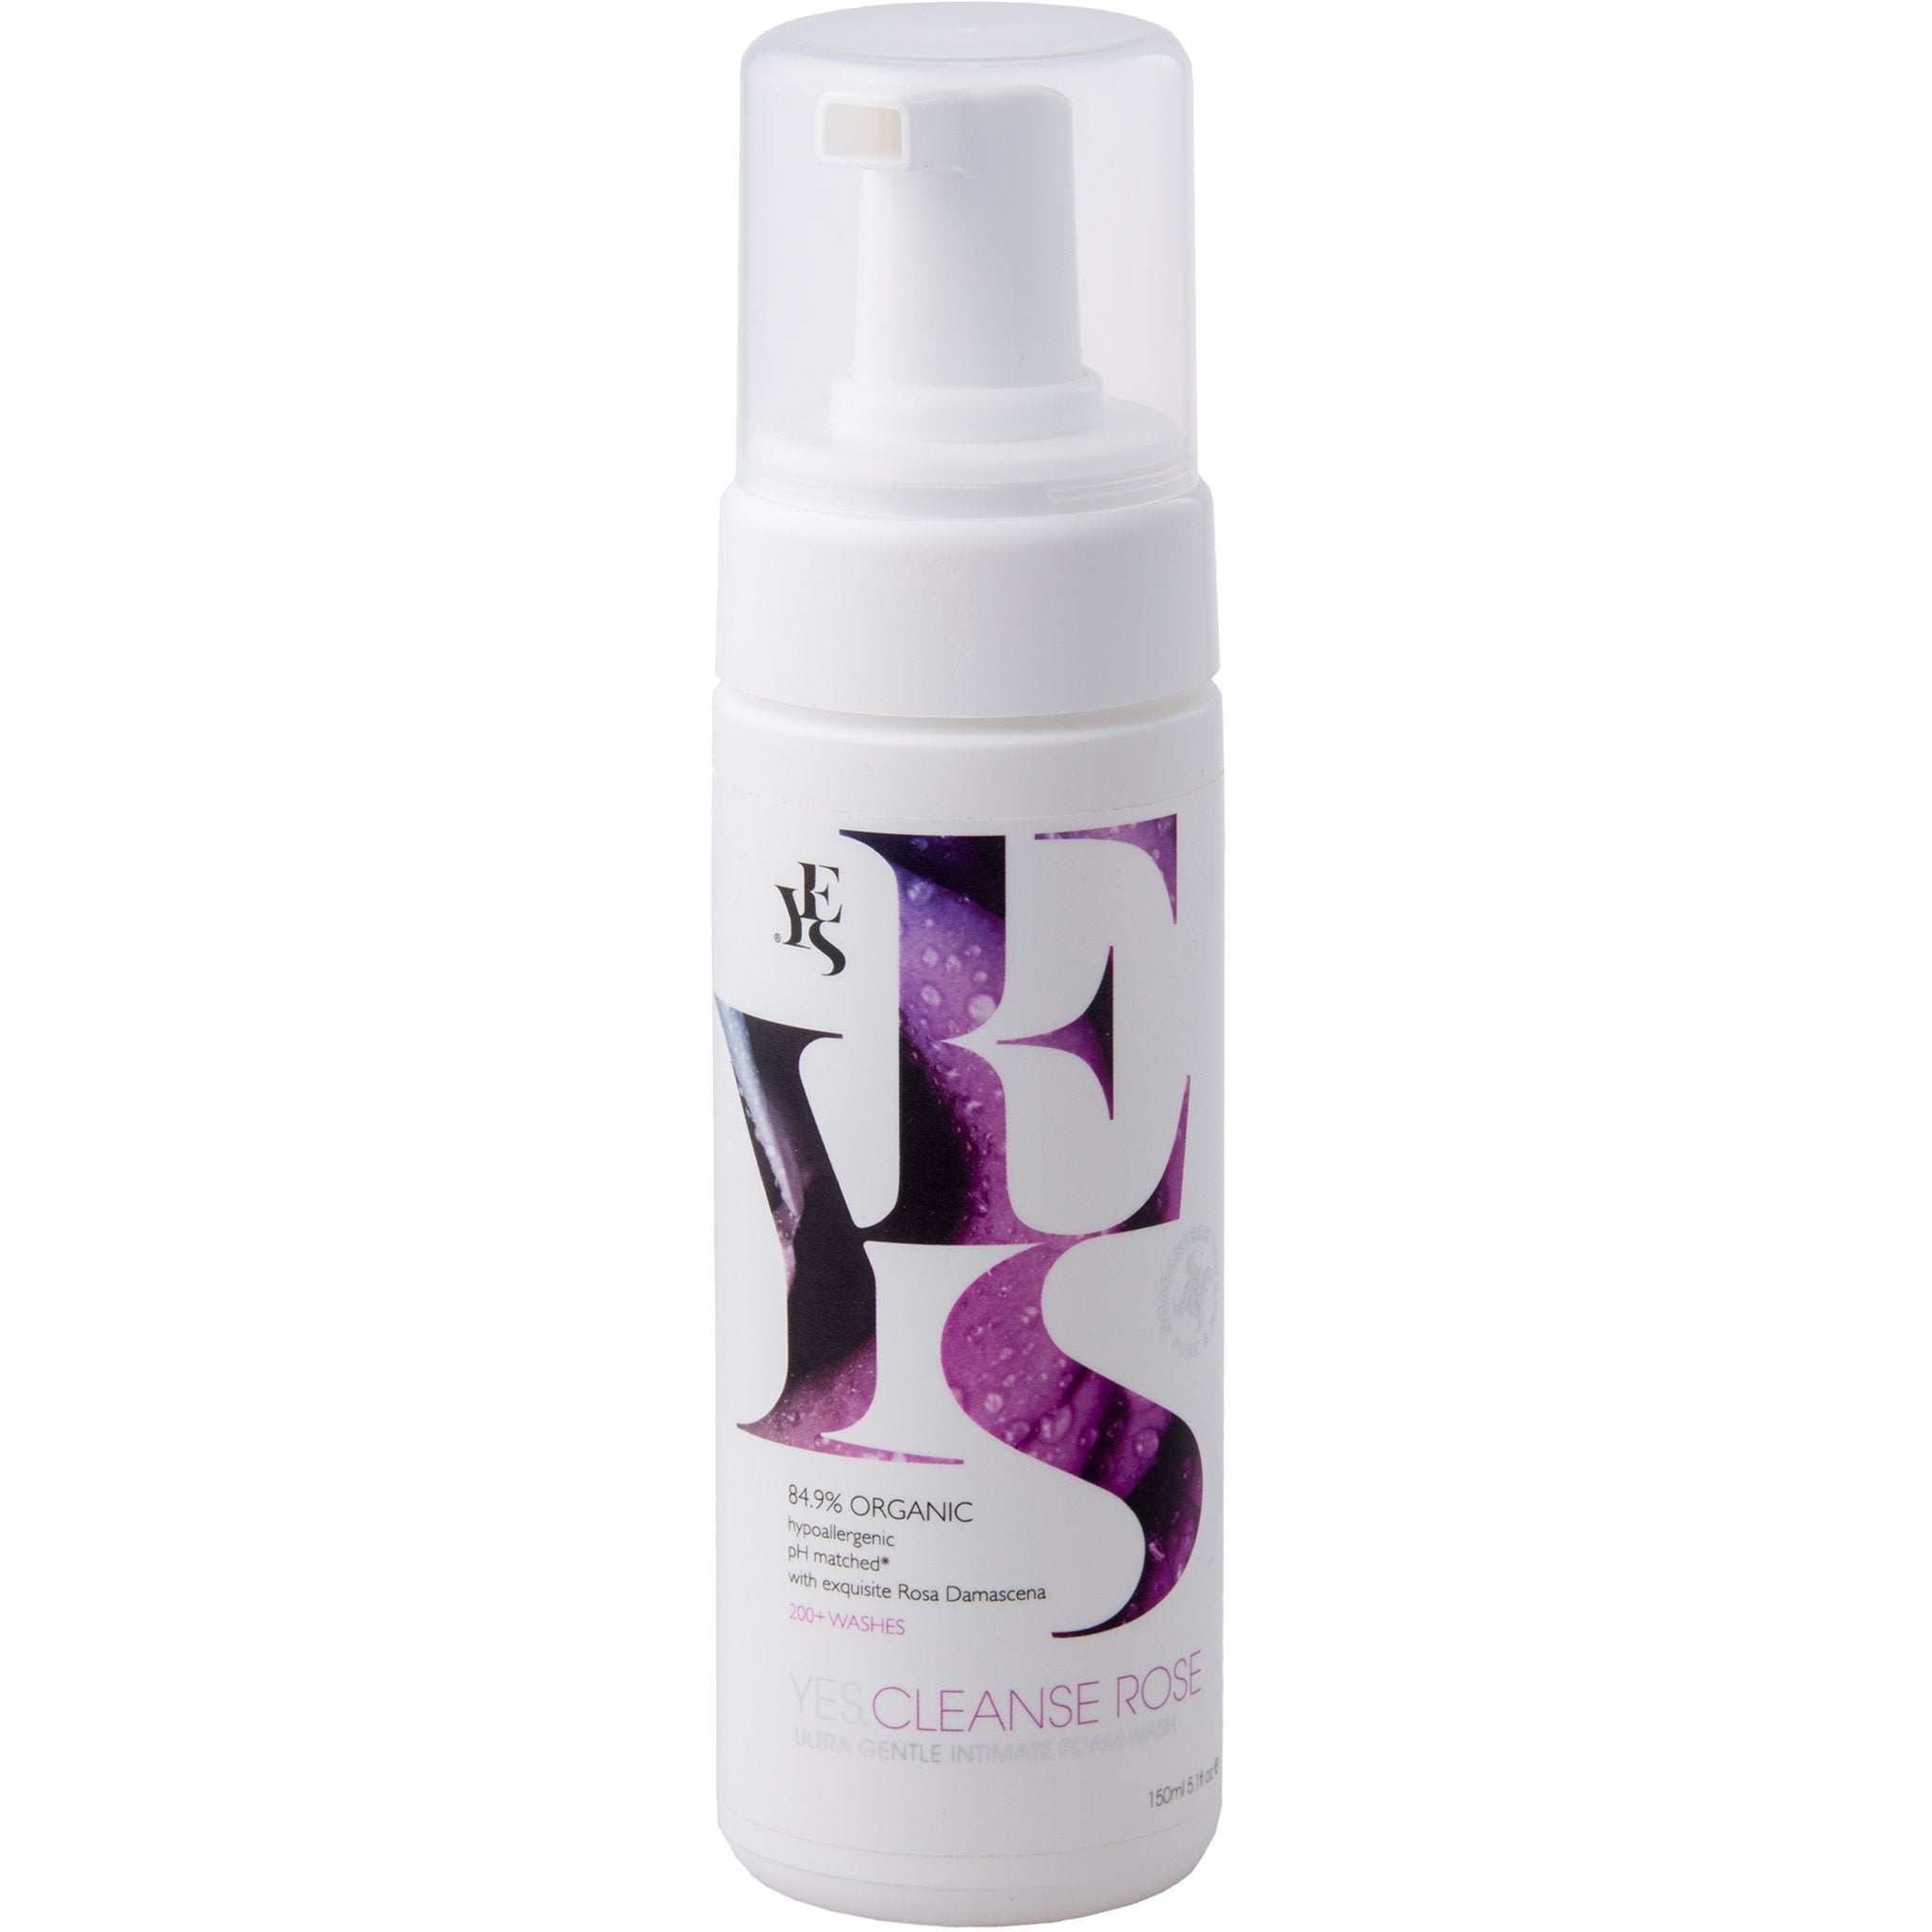 YES CLEANSE intimate wash - Rose